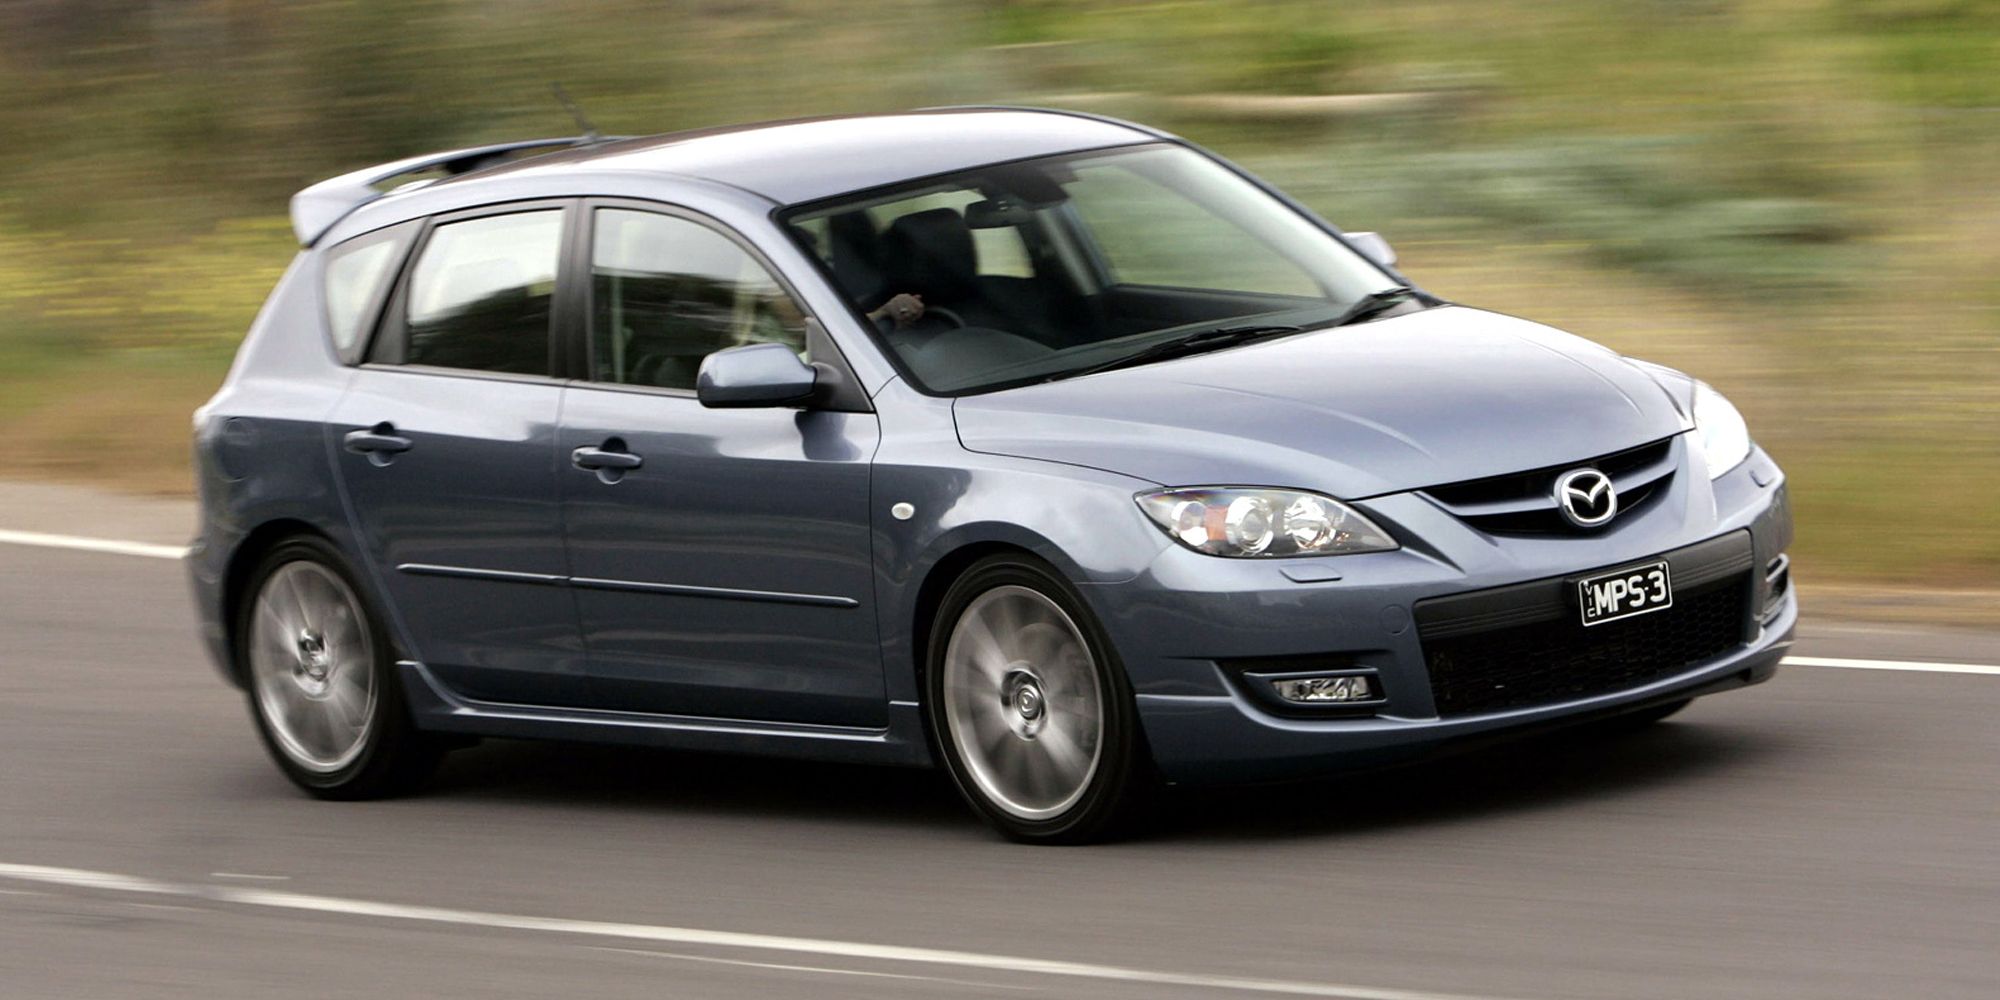 Front 3/4 view of a first gen Mazdaspeed 3 on the move